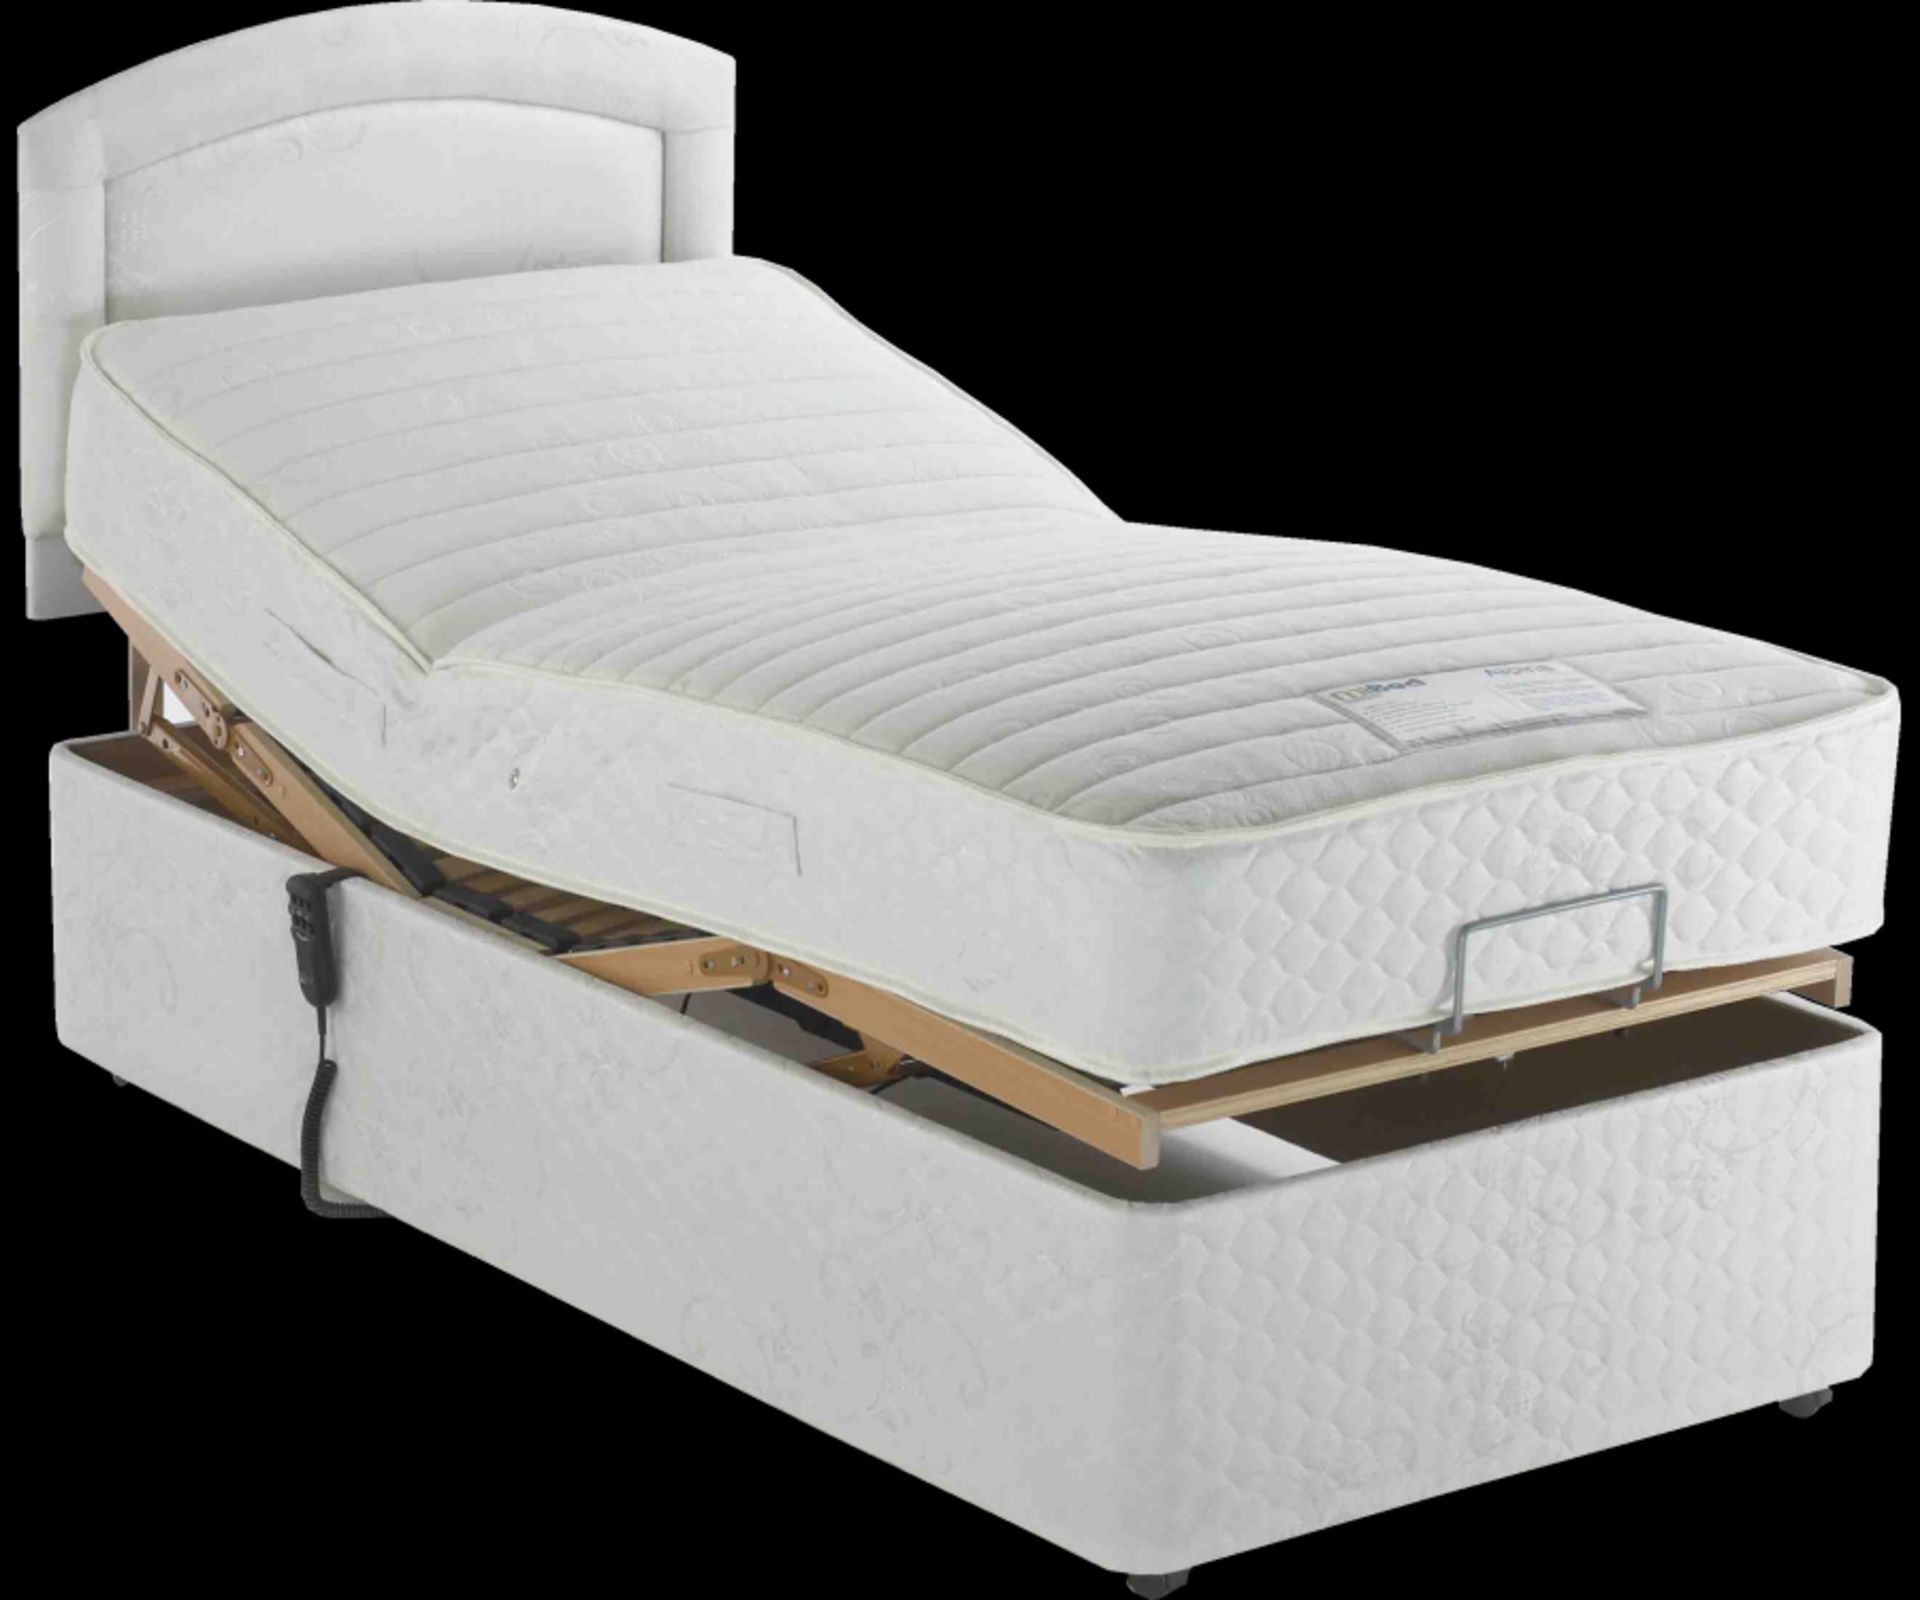 Brand new Alpina 2'6 adjustable electric bed with luxury pocket sprung mattress - Image 2 of 2